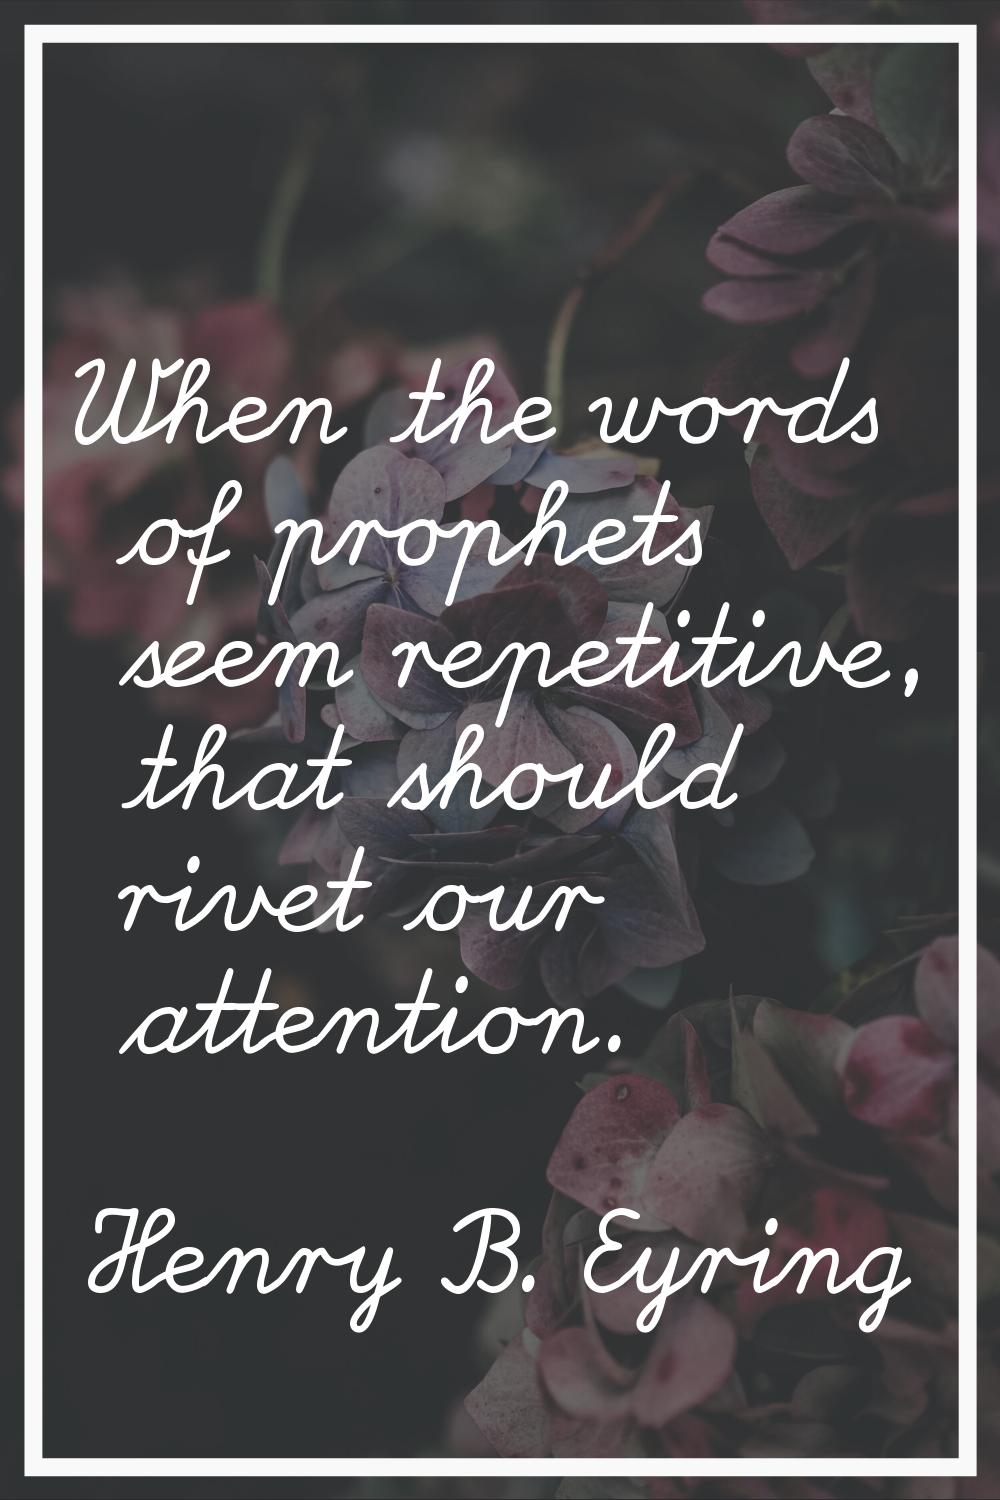 When the words of prophets seem repetitive, that should rivet our attention.